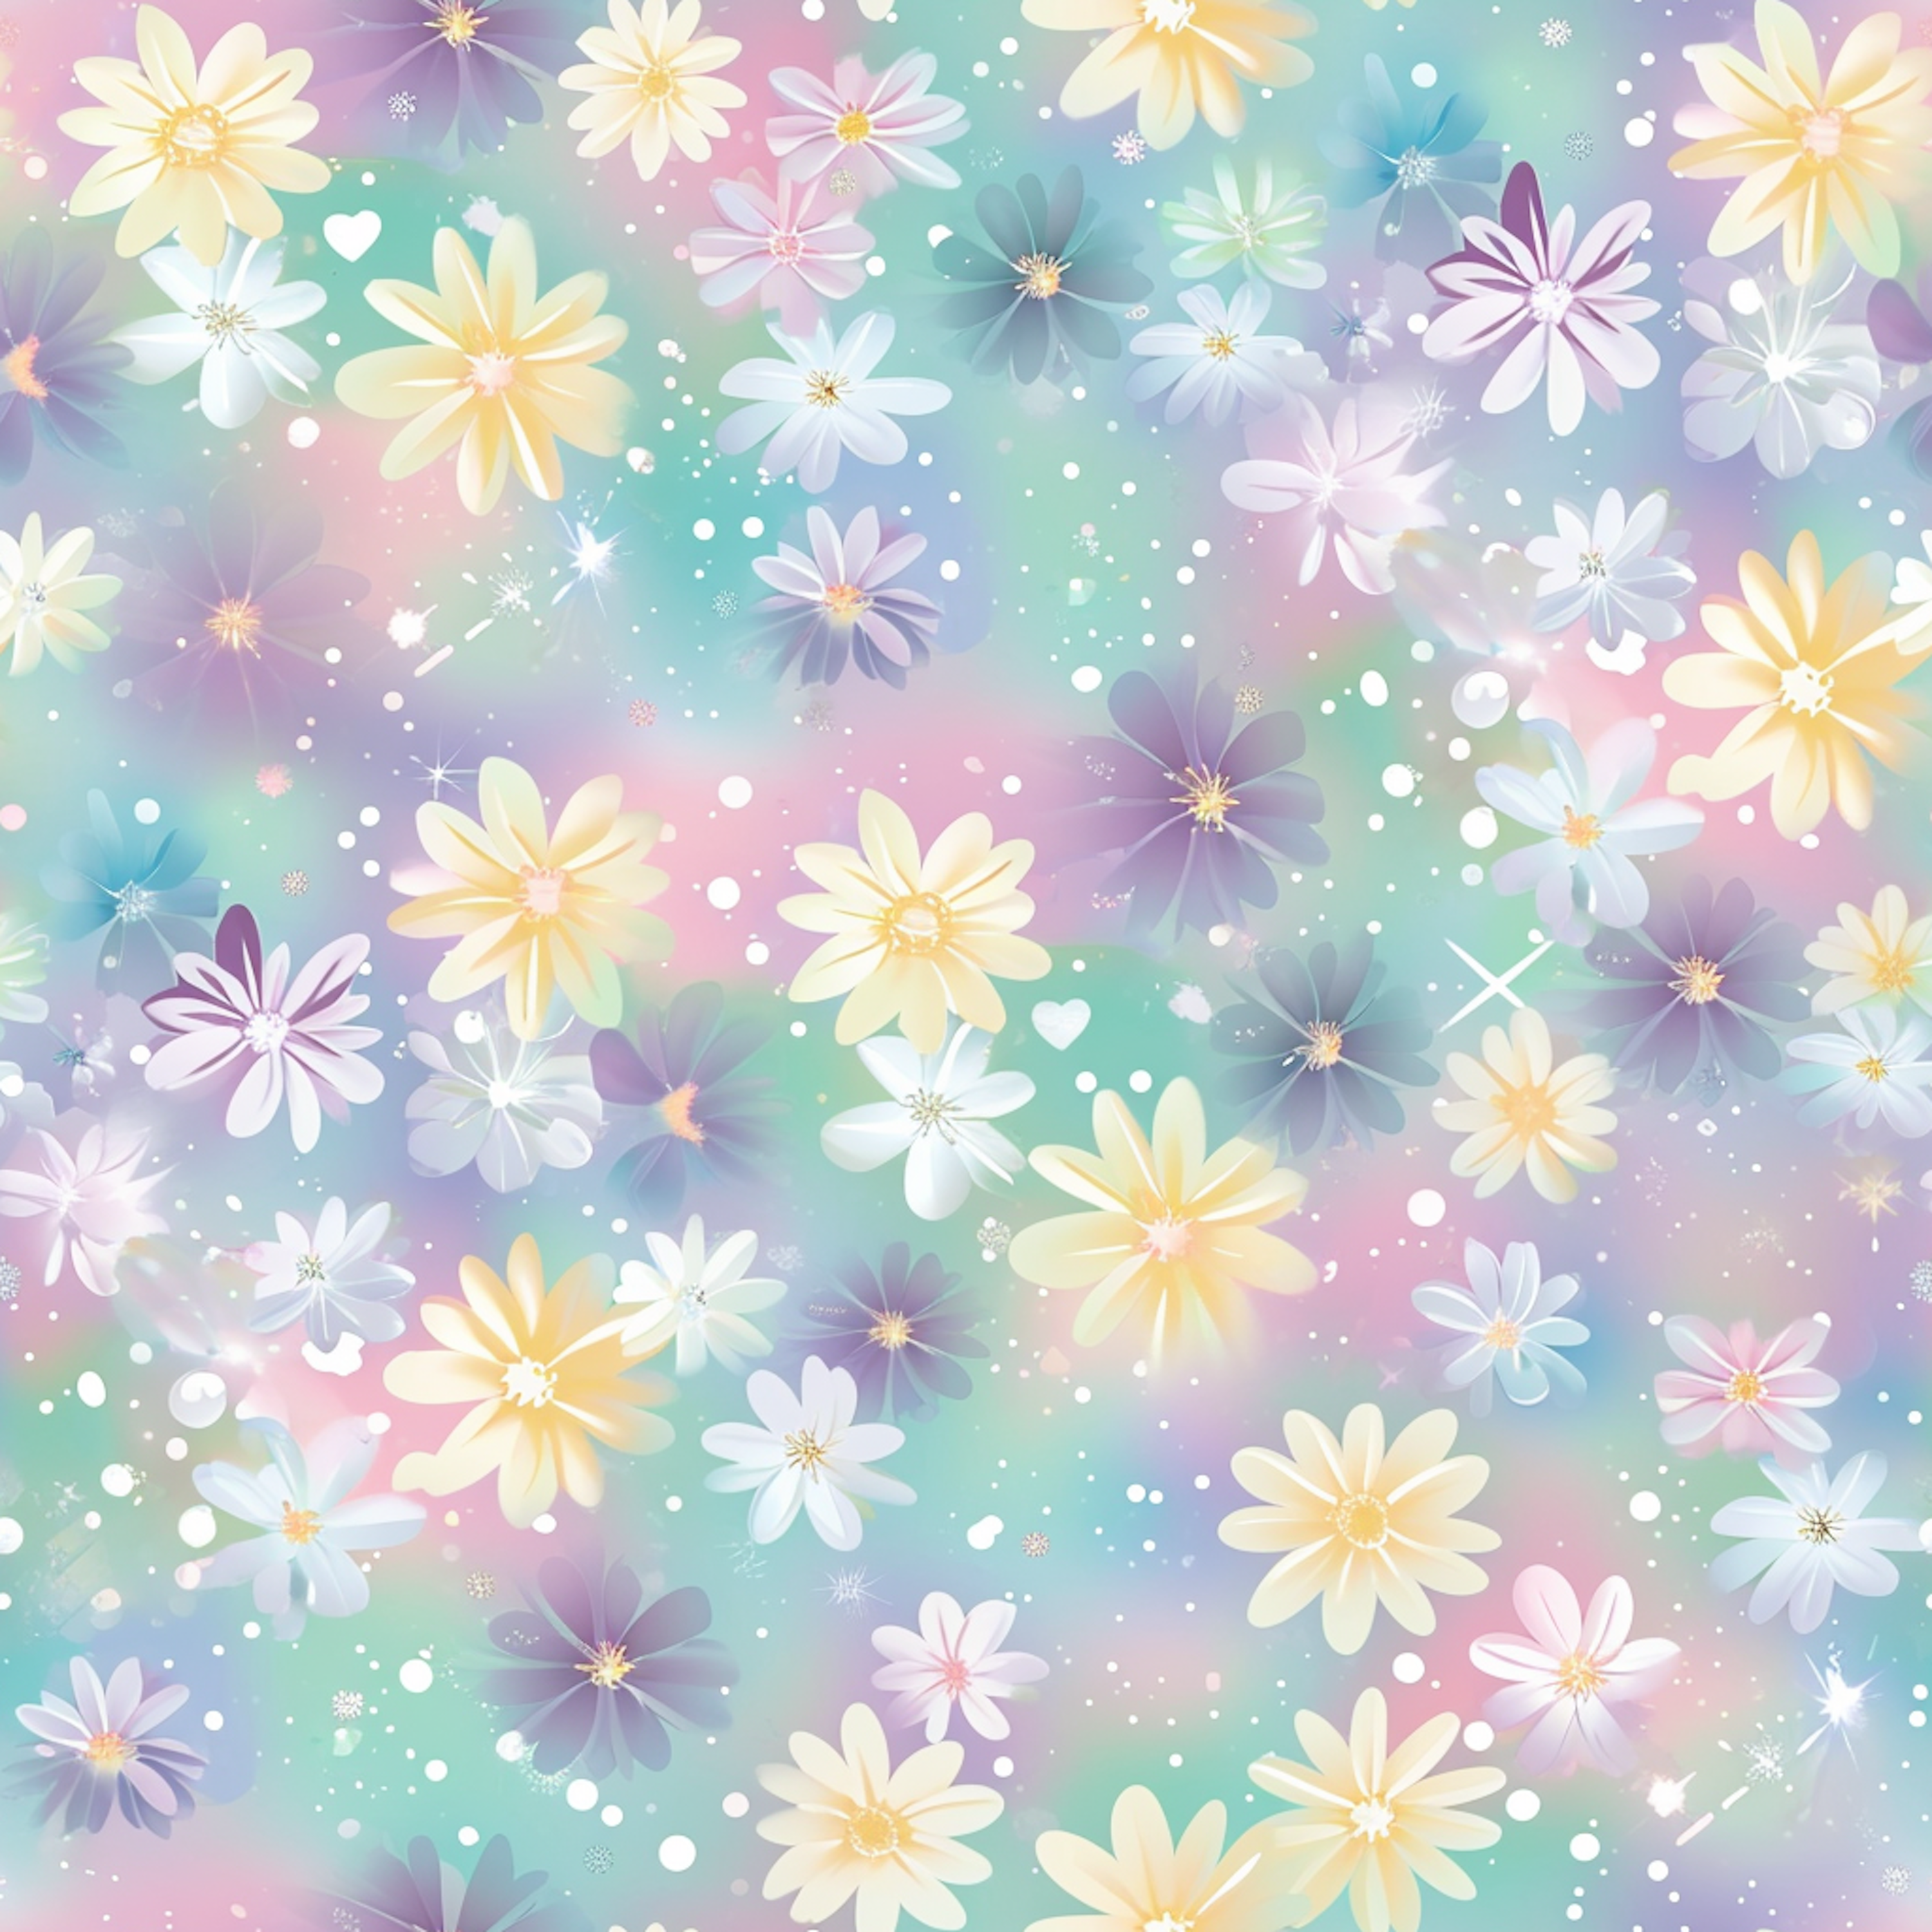 Sparkly floral